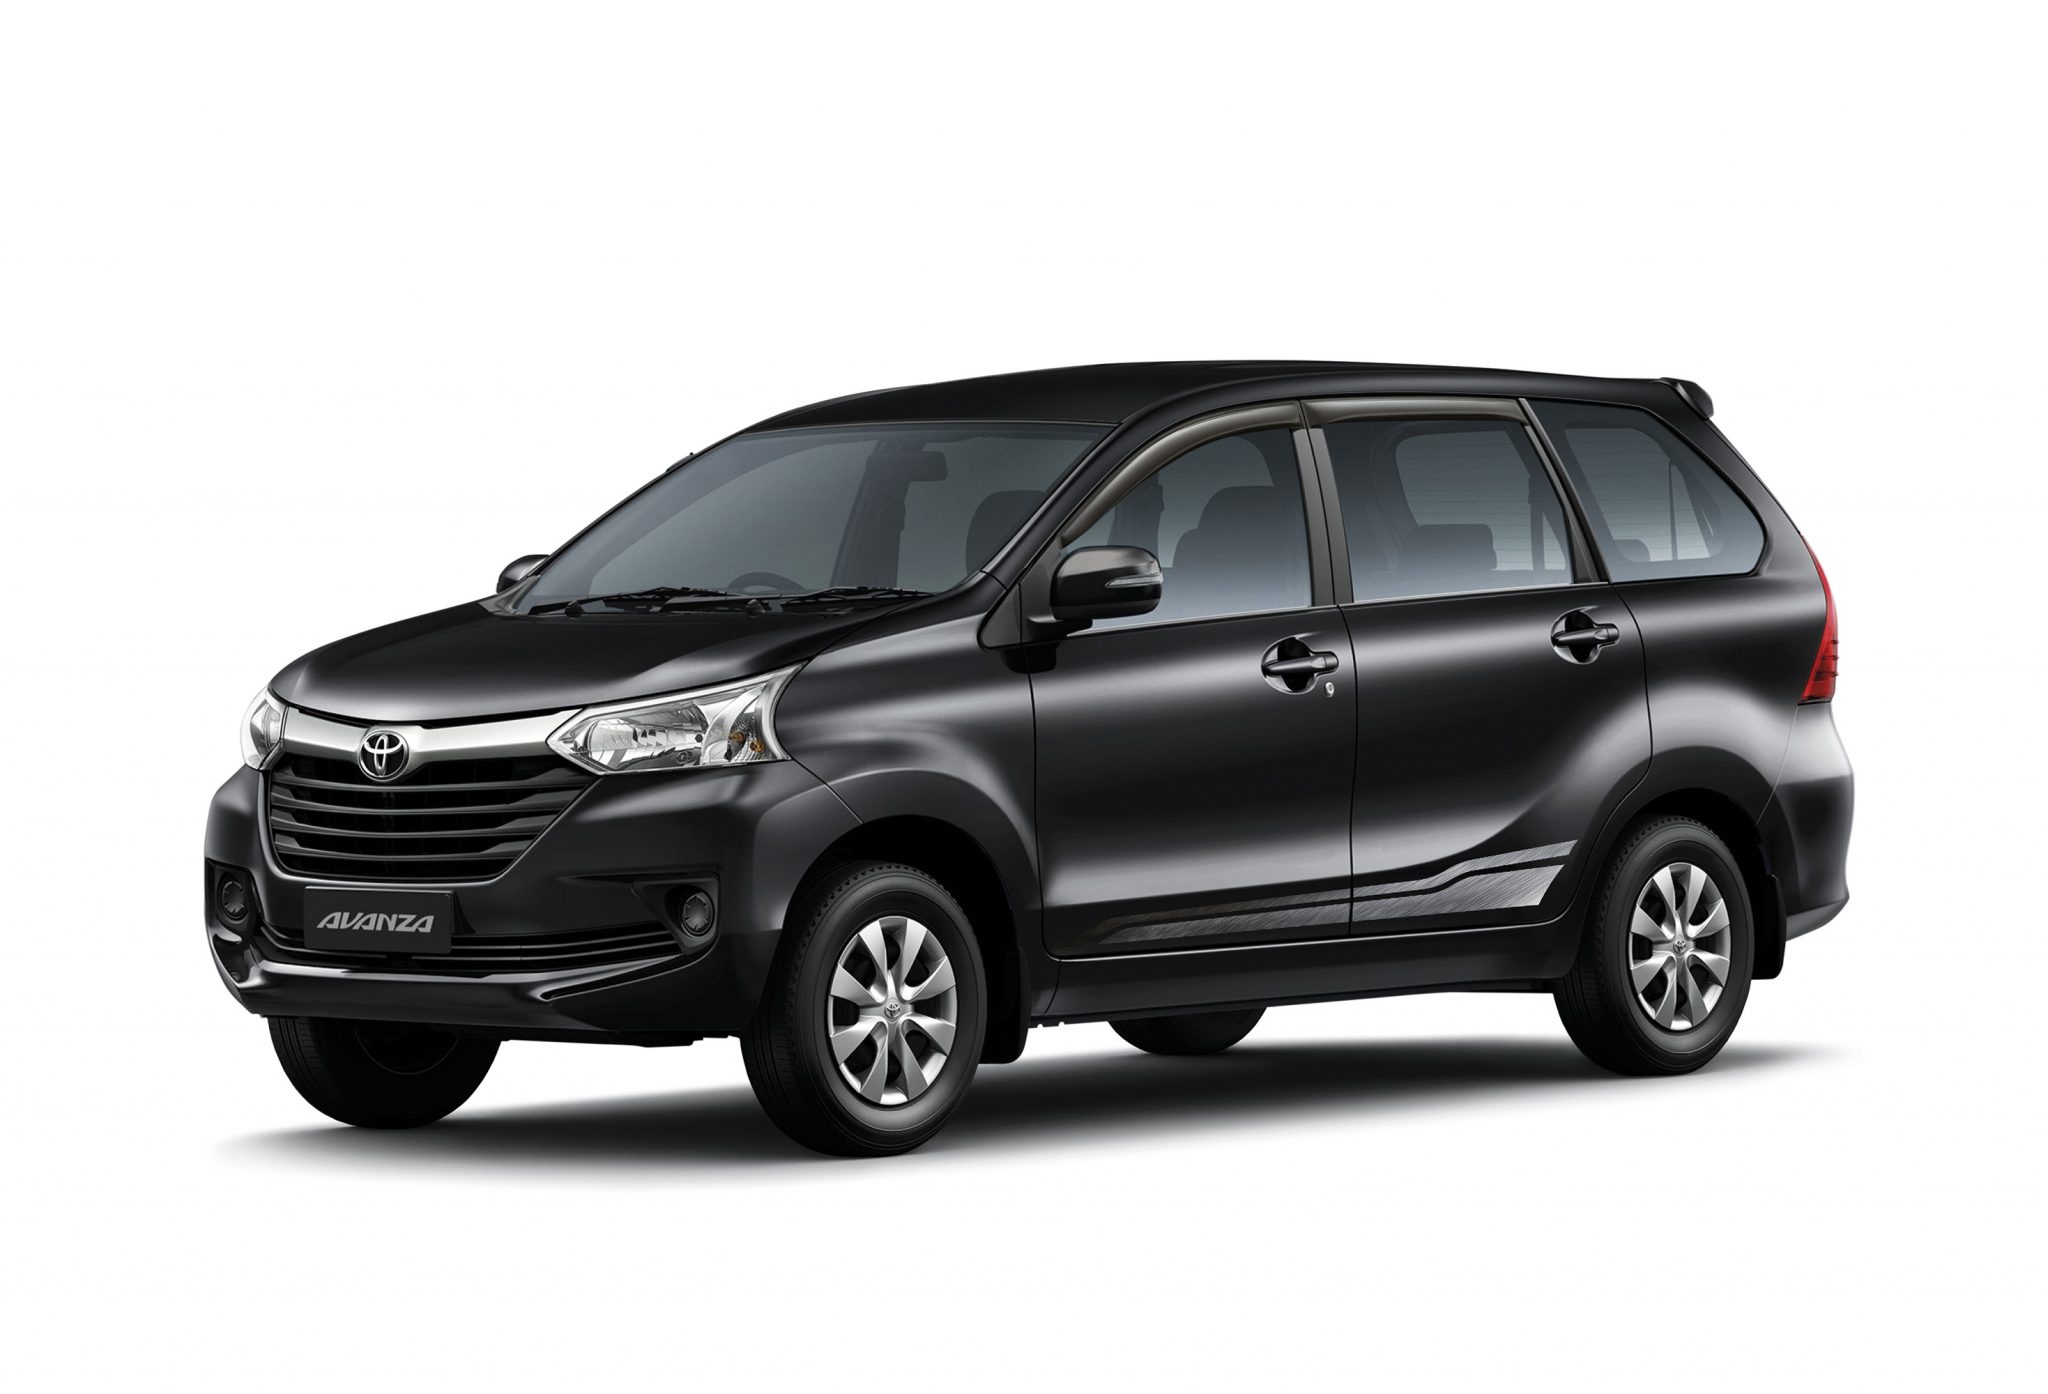 Facelifted Toyota Avanza launched in Malaysia from RM69,072